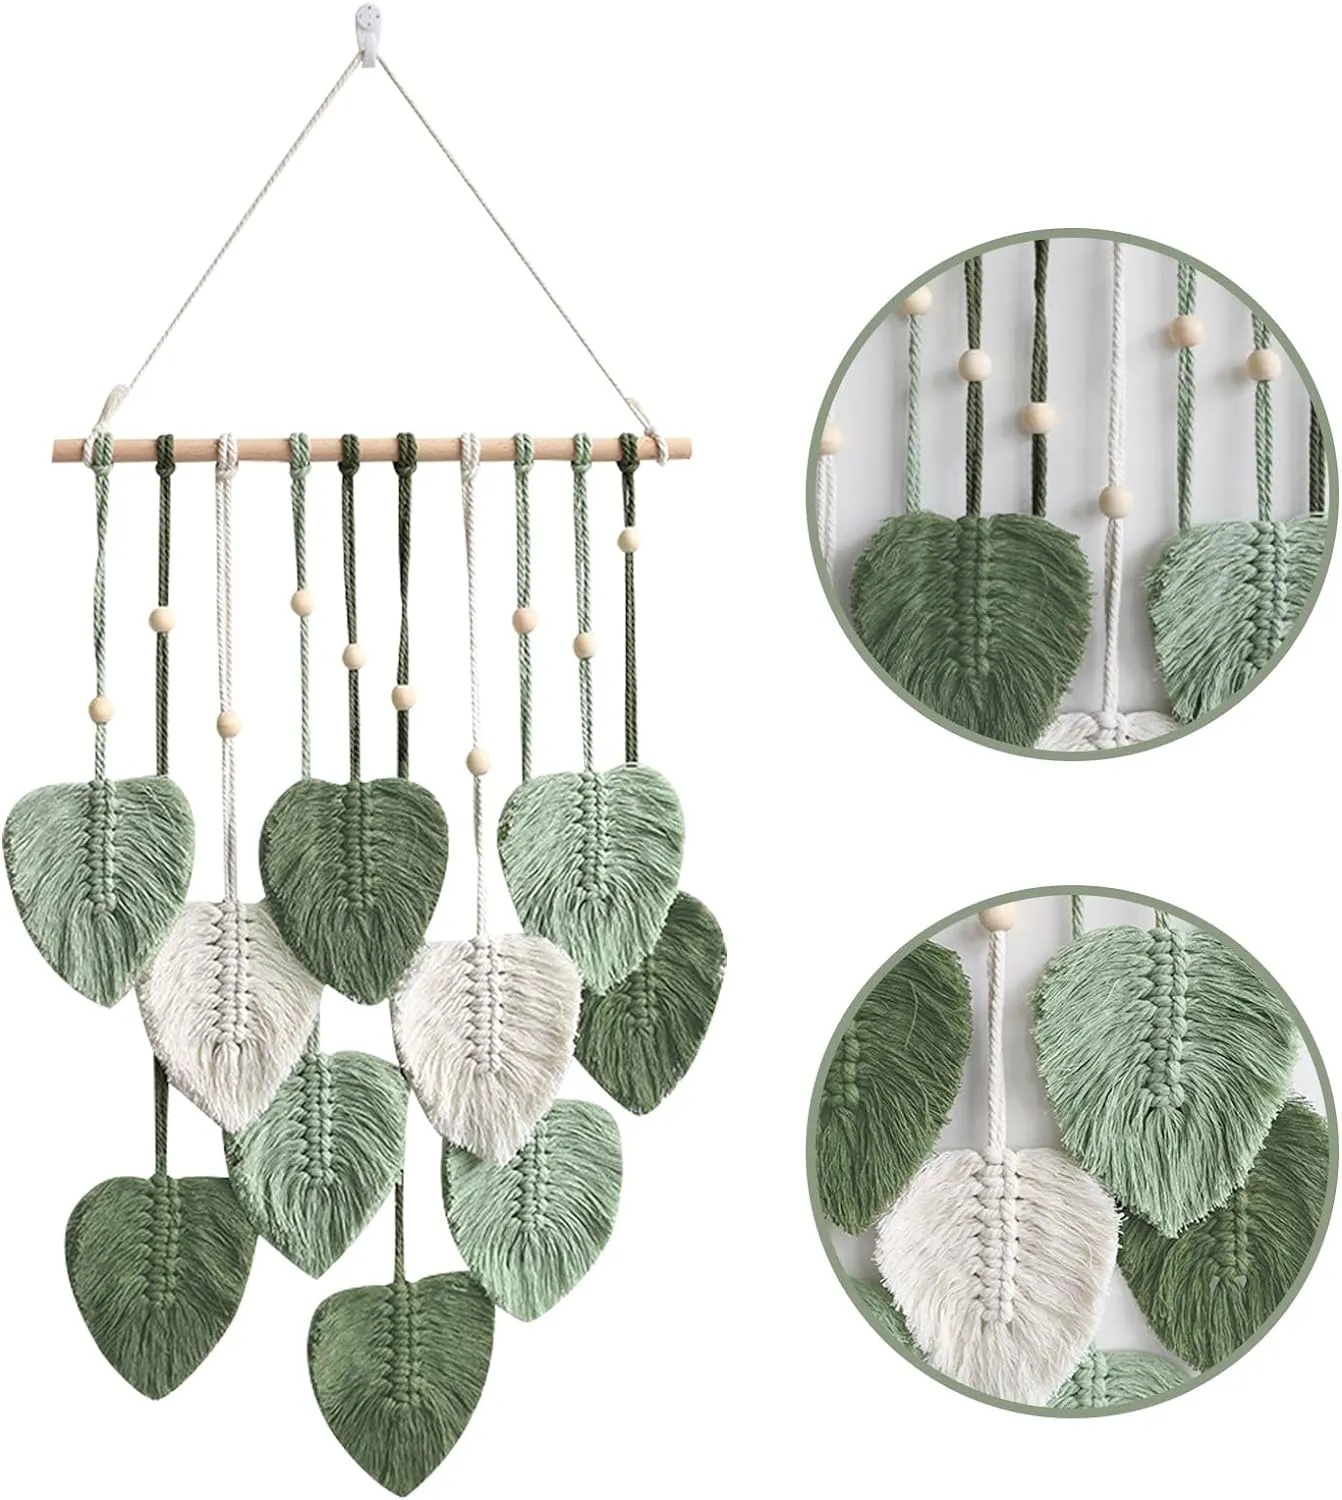 Macrame Wall Hanging Leaves, Boho Wall Decor Feather Woven Leaves Tassels Decoration, Handmade Leaf Feather Wall Art 1221707